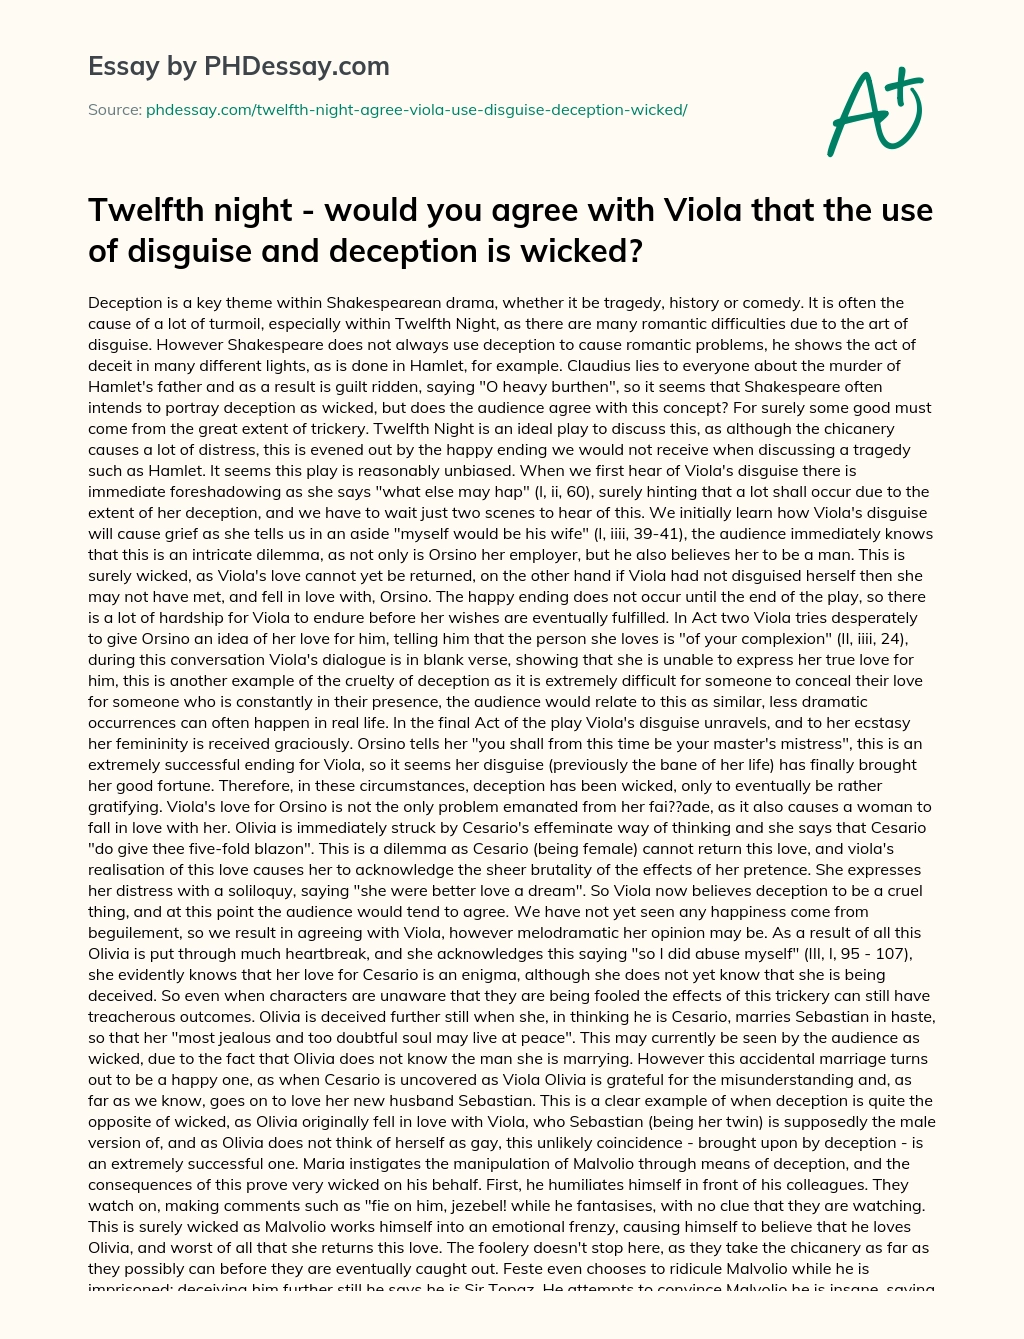 Twelfth night – would you agree with Viola that the use of disguise and deception is wicked? essay